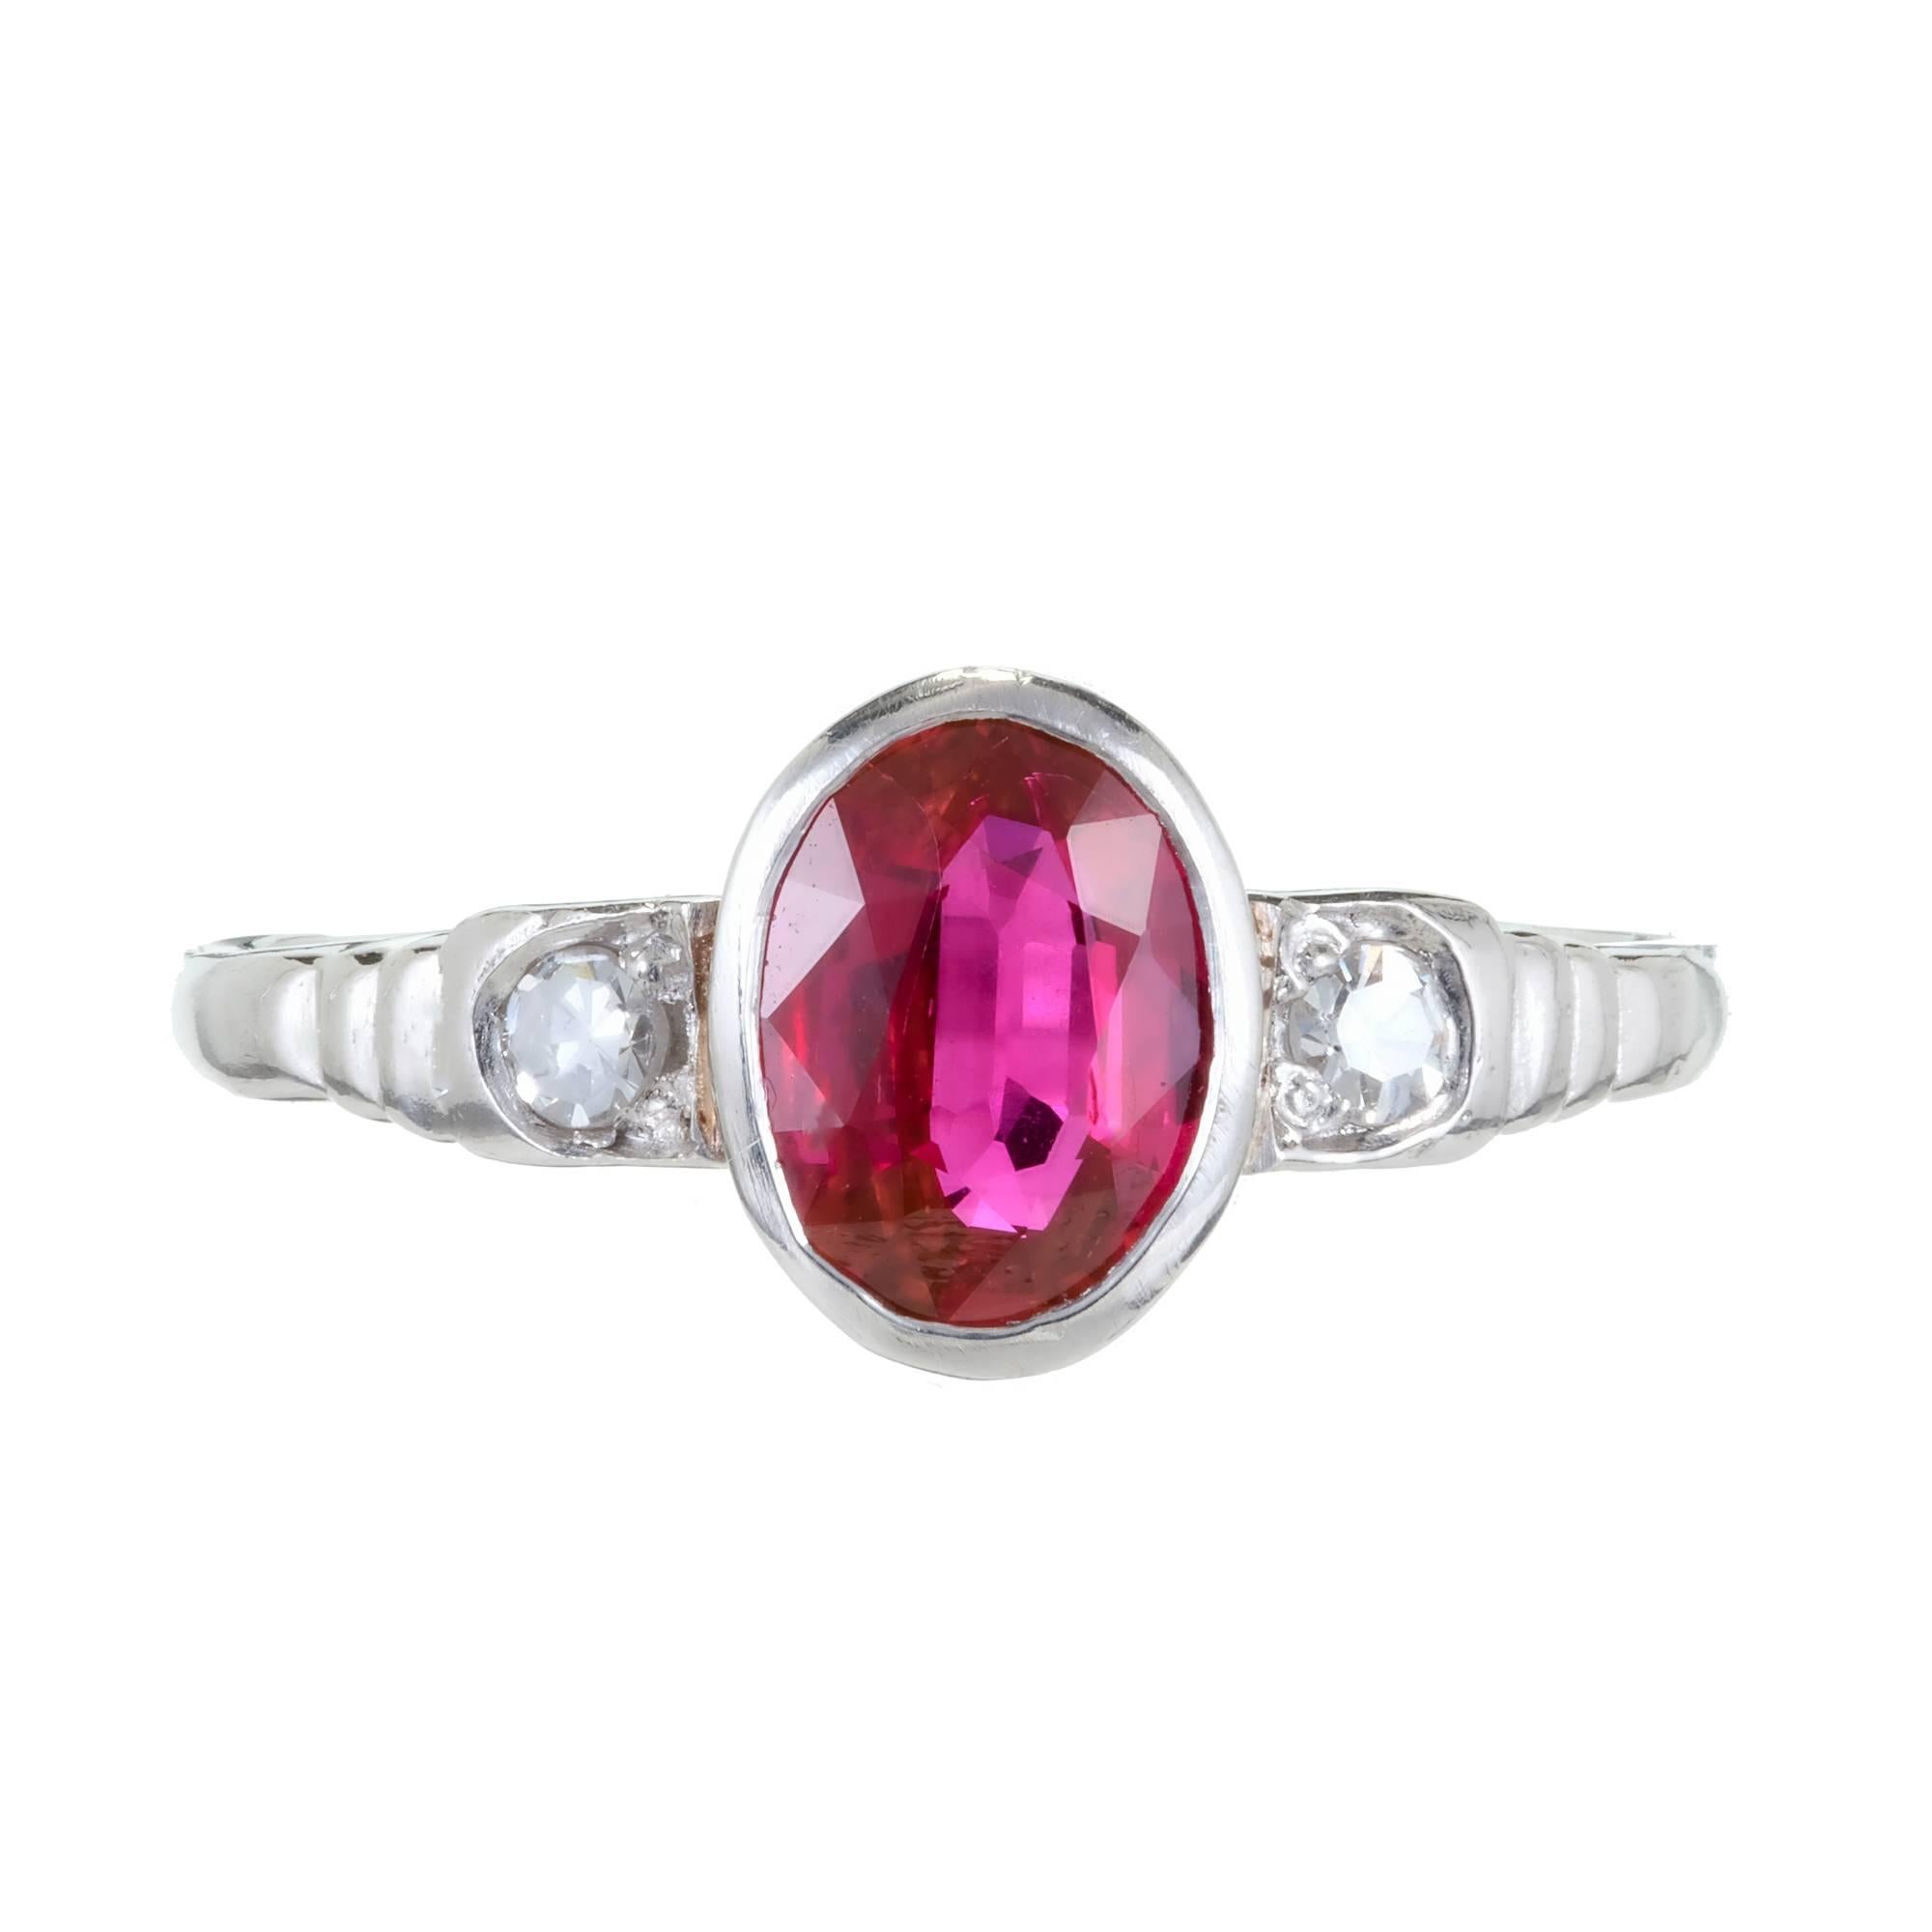 1940 late Art Deco simple Platinum engagement ring with bezel set natural no heat red certified oval Ruby and accent diamonds. AGL Certified GB 47126

1 oval fine red natural Ruby, approx. total weight .80cts, SI1, 7.18 x 5.11 x 2.47mm, no heat and